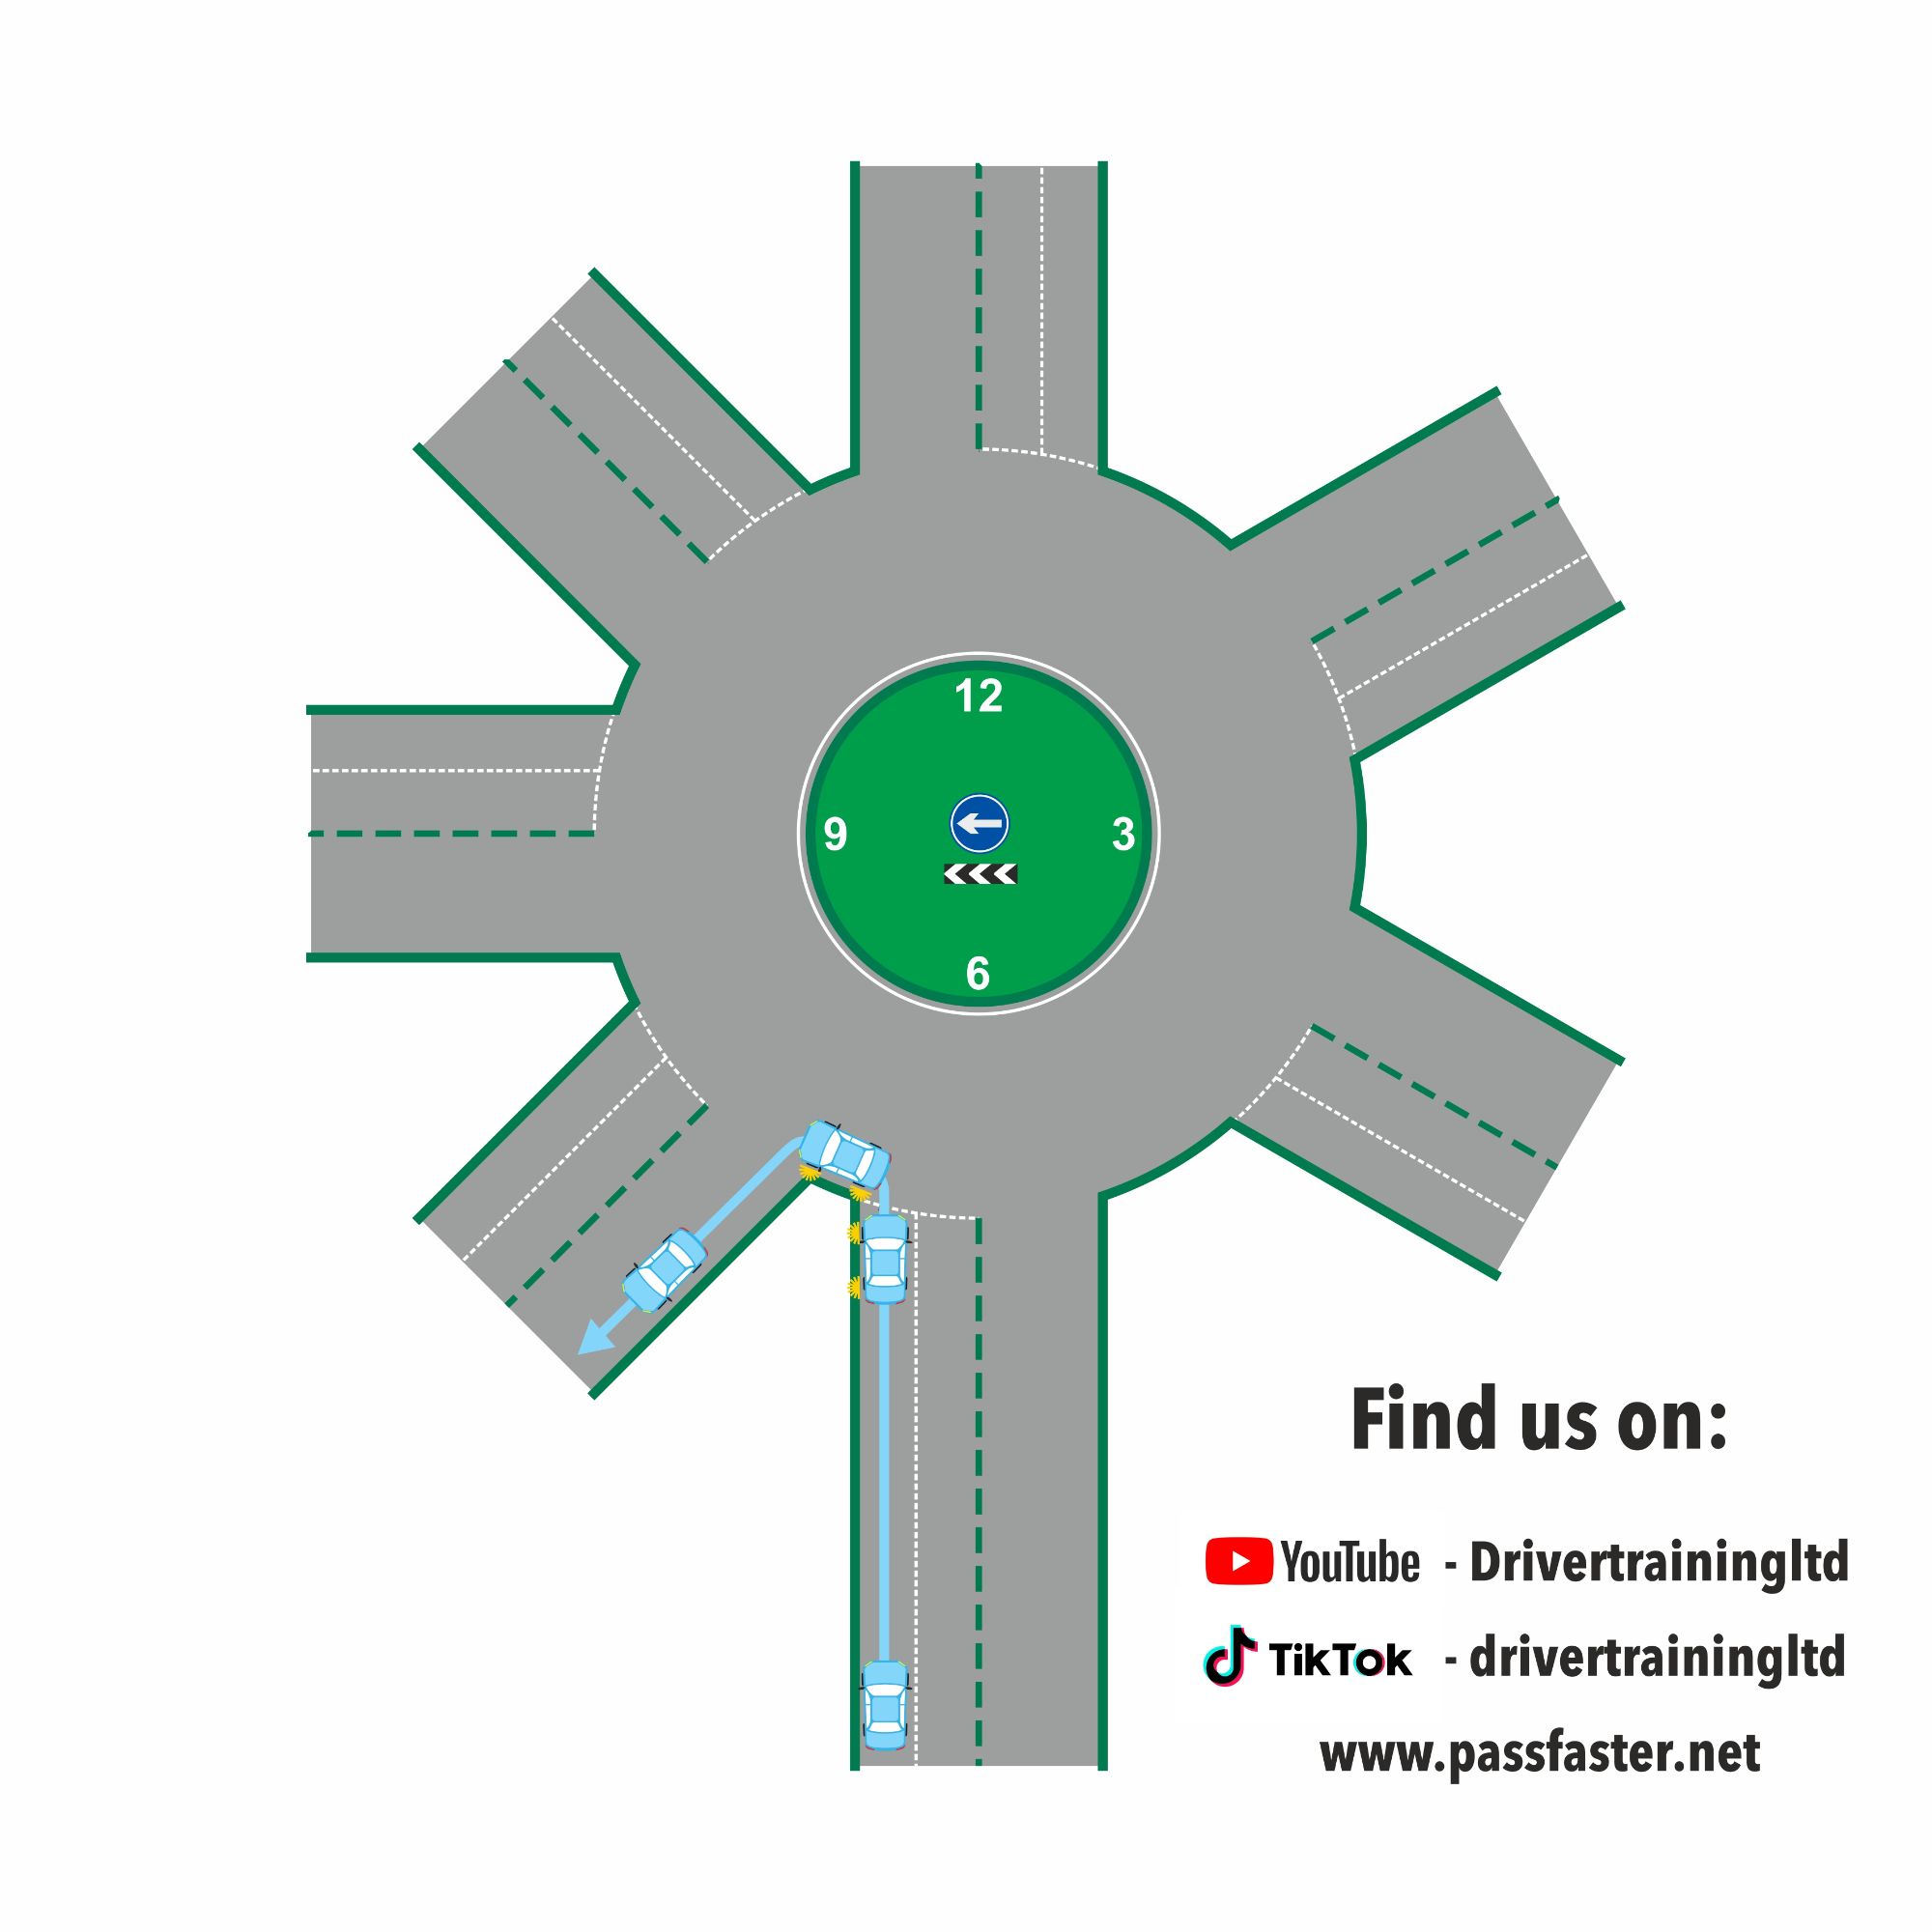 Lane Position on Roundabouts  If the exit that you want is at 12 oâ€™clock or before you use the left lane.  So if we want the first exit. You stay in the left lane, check the centre and left mirror. Signal left. And come off at the first exit.